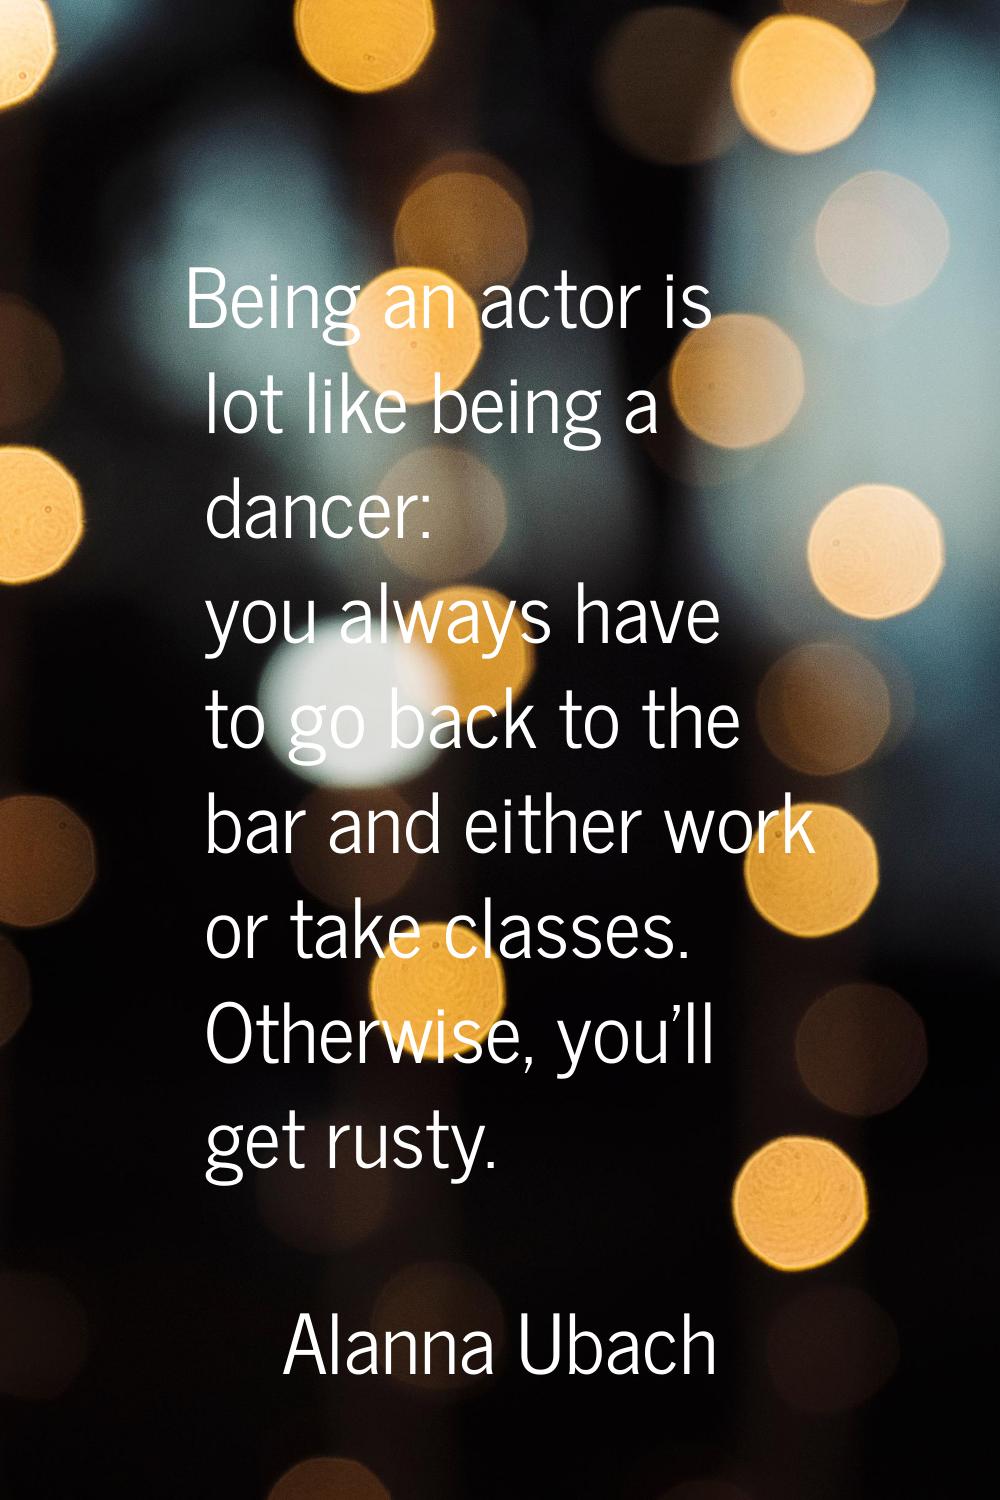 Being an actor is lot like being a dancer: you always have to go back to the bar and either work or